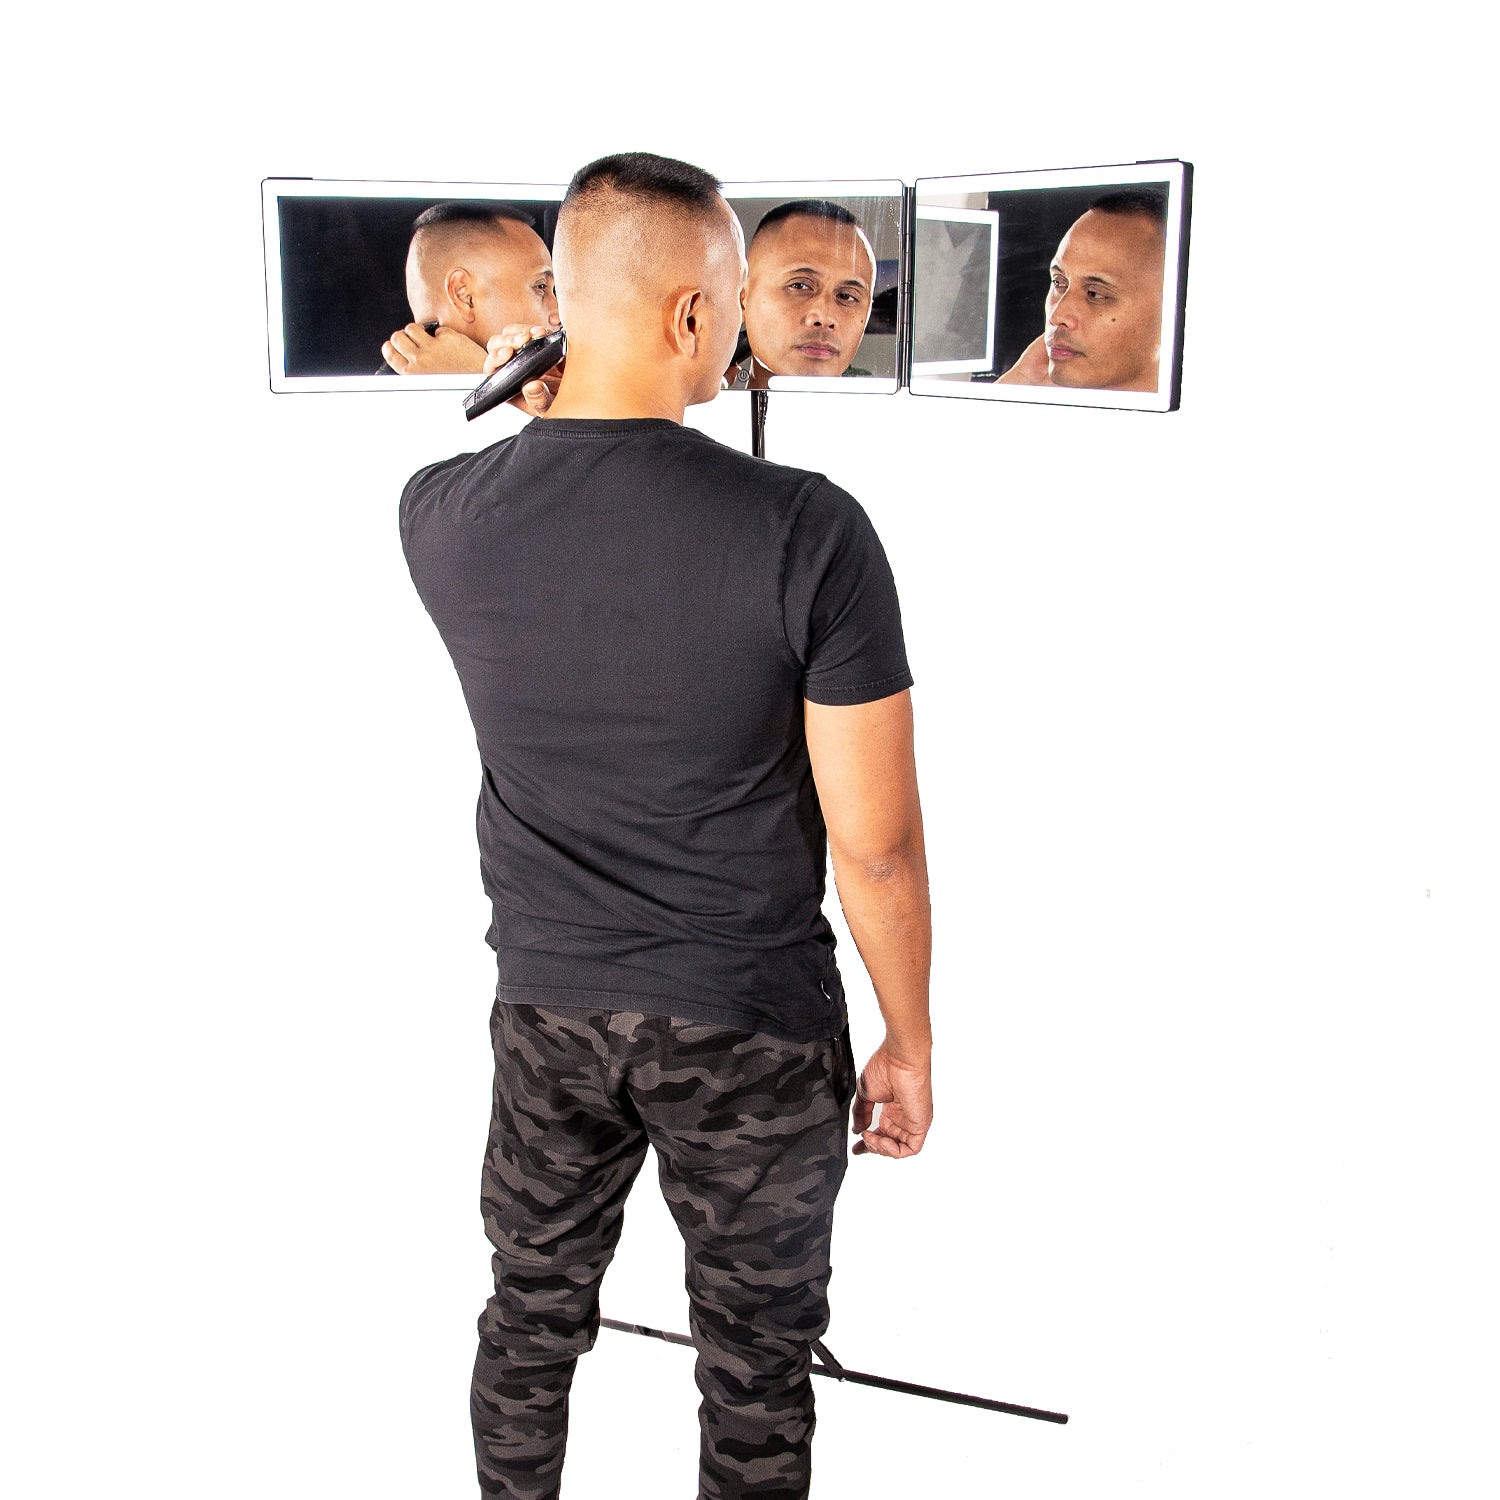 SELF-CUT SYSTEM Travel Version - Three Way Mirror for Self Hair Cutting  with and 680474588152